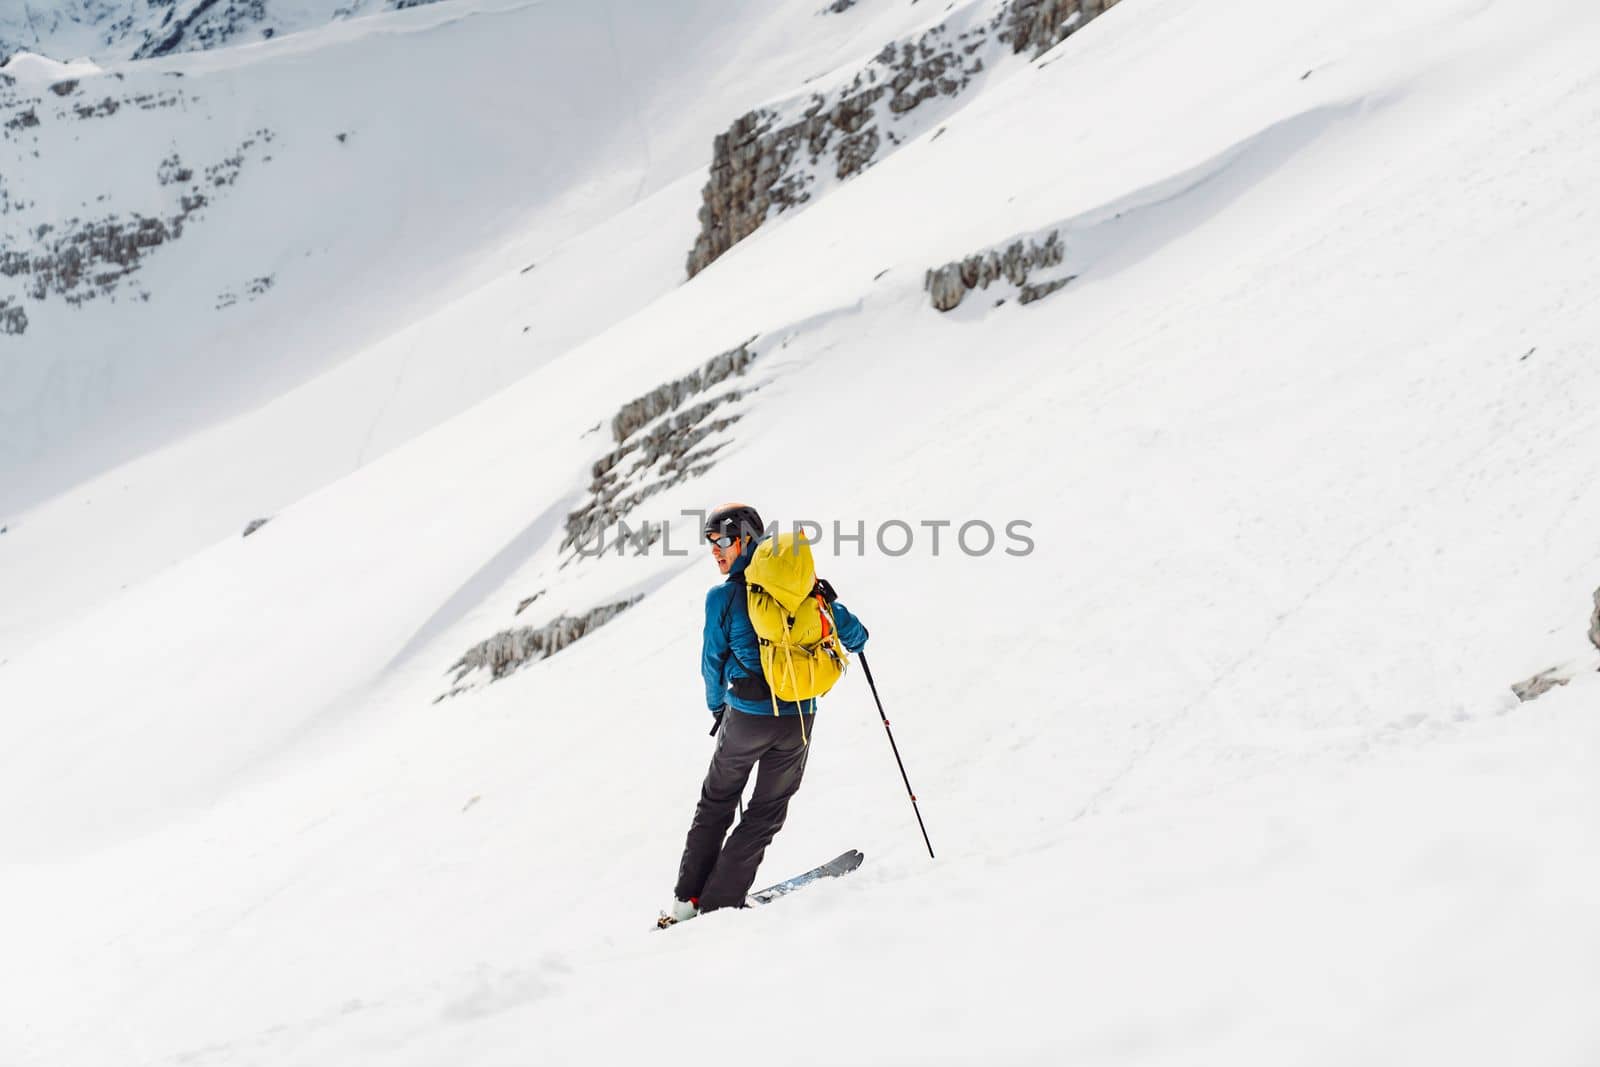 Mountaineer backcountry ski touring in the mountains. Ski touring in high alpine landscape with snowy trees. Adventure winter extreme sport. High quality photo